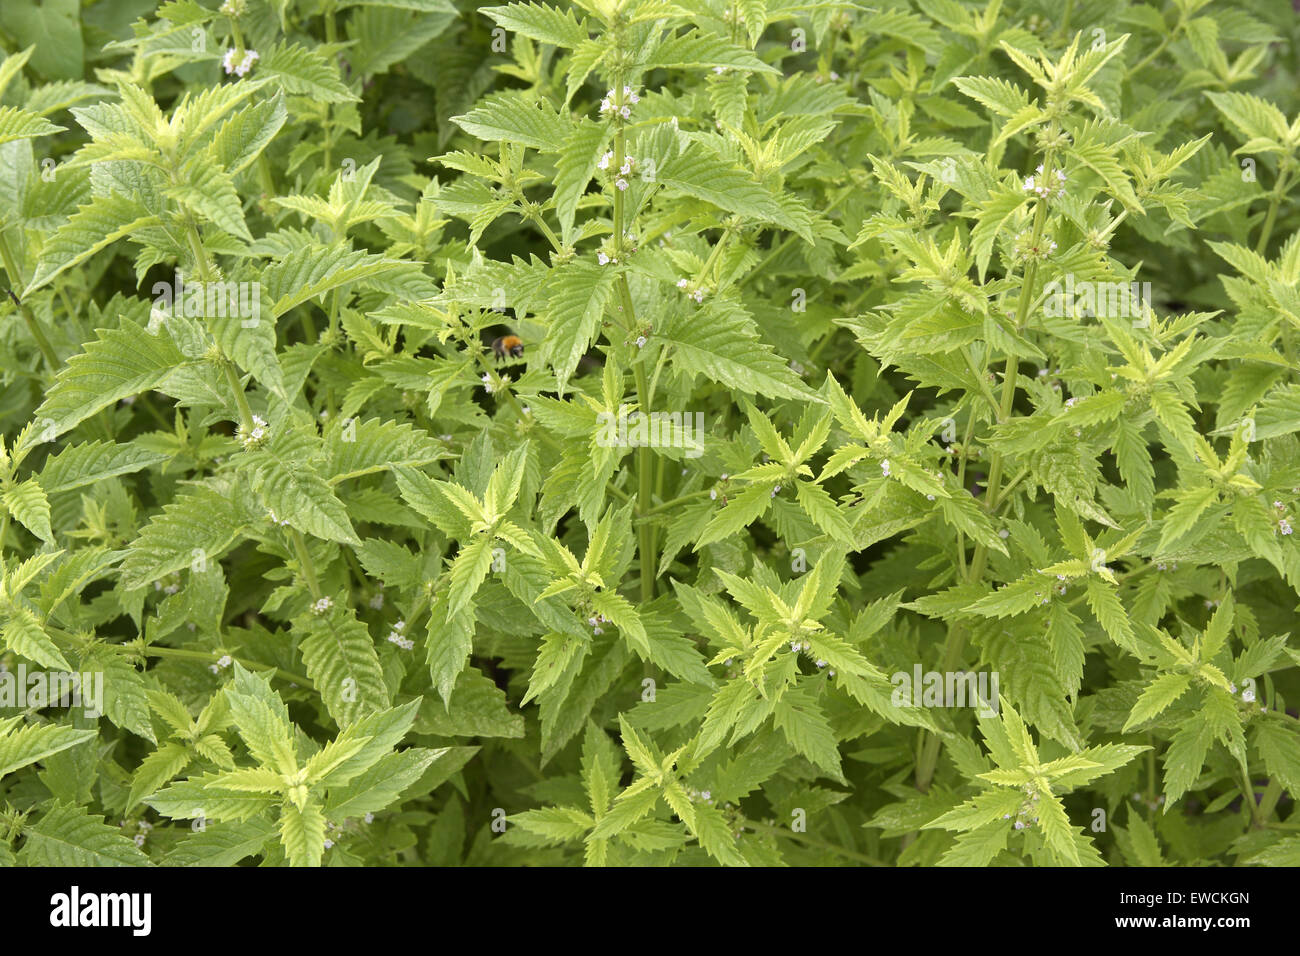 L'Europe, l'Allemagne, Bugleweed [lat. Lycopus europaeus]. Banque D'Images